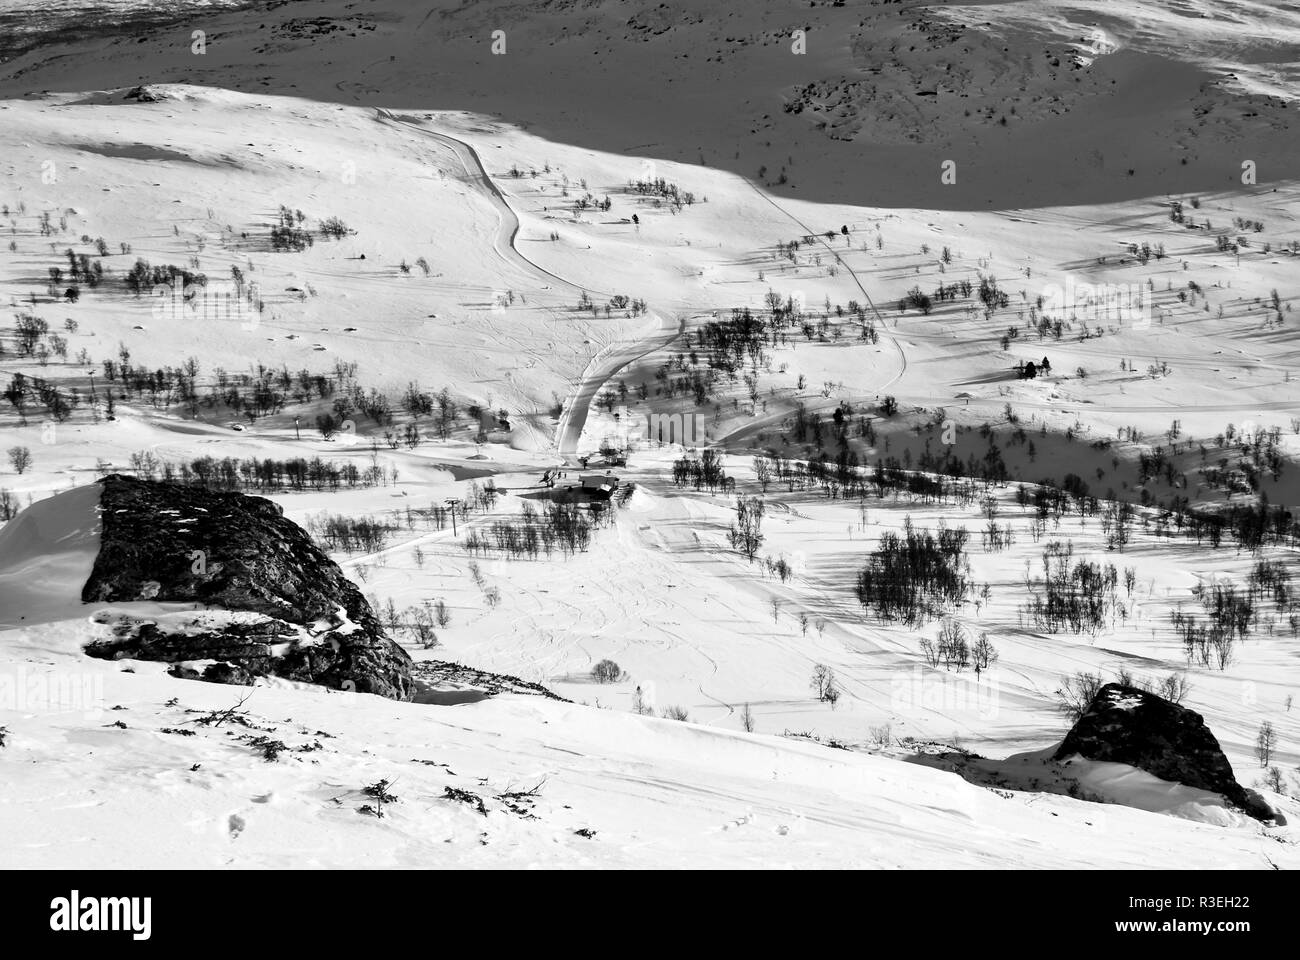 A beautiful scene of a ski system from above, Oppdal, Norway Stock Photo